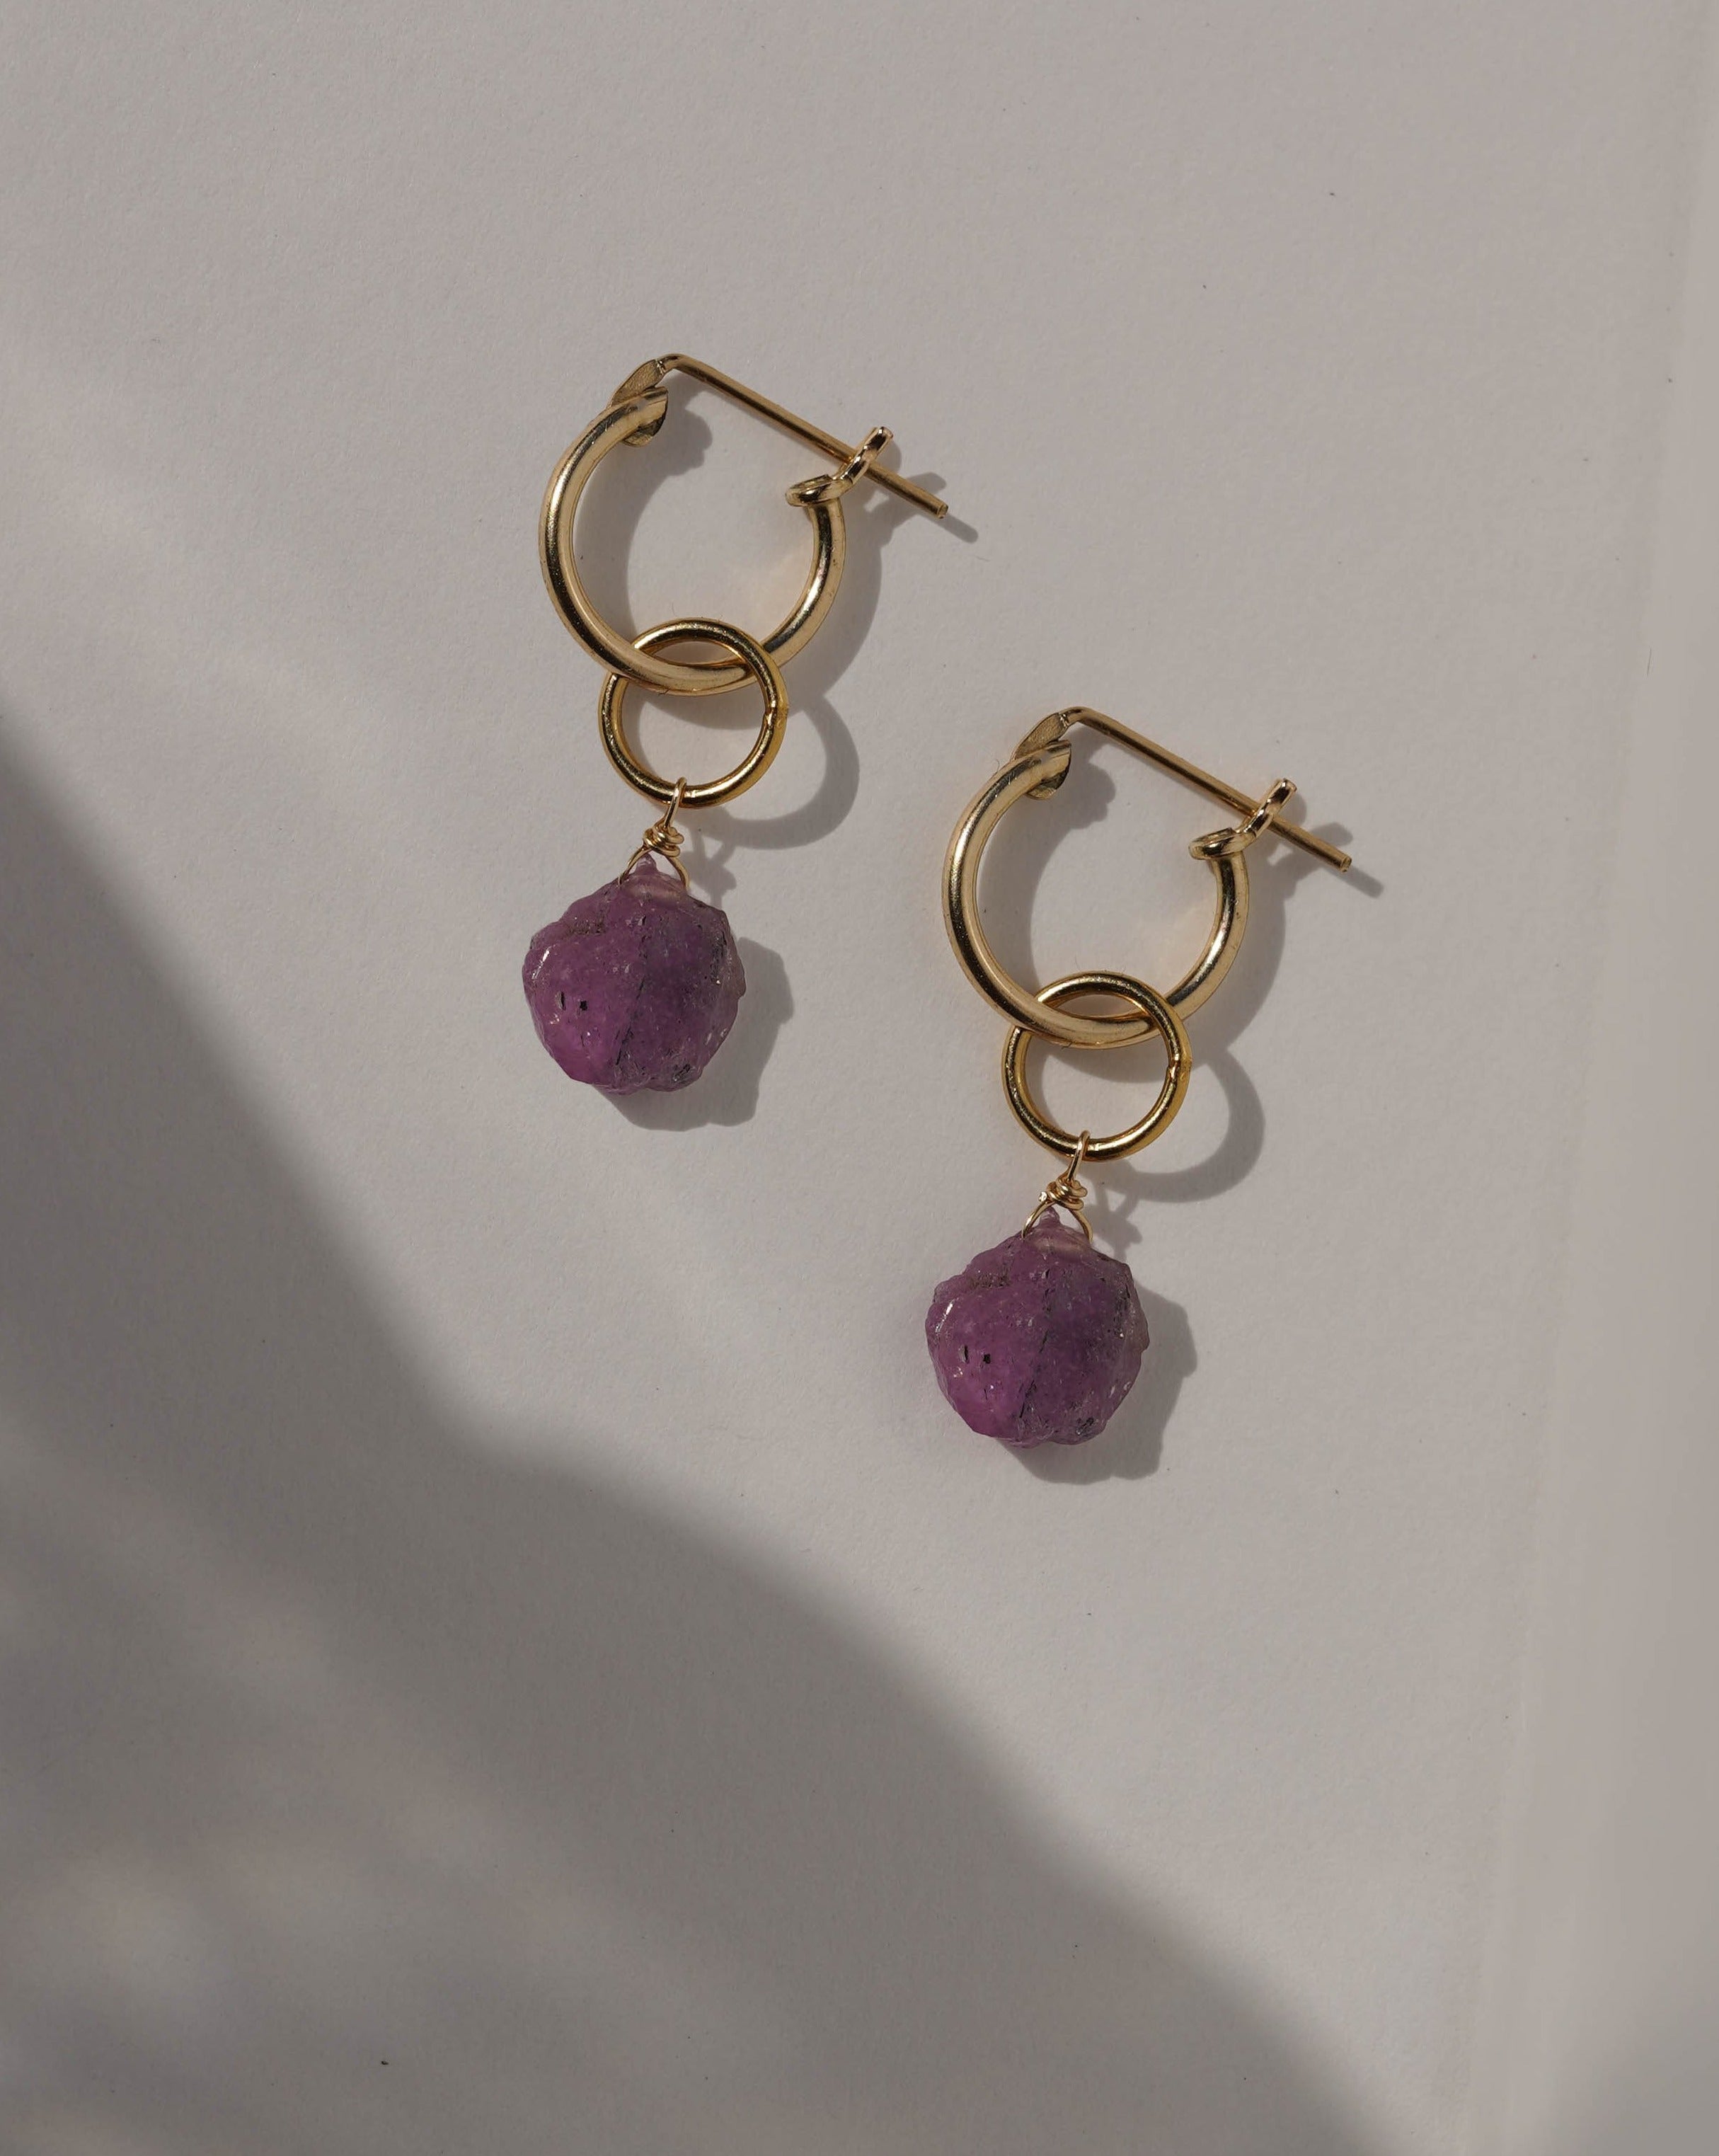 Sugar Earrings by KOZAKH. 12mm snap closure hoop earrings, with 1 inch drop length, crafted in 14K Gold Filled, featuring a Pink Tourmaline slice.